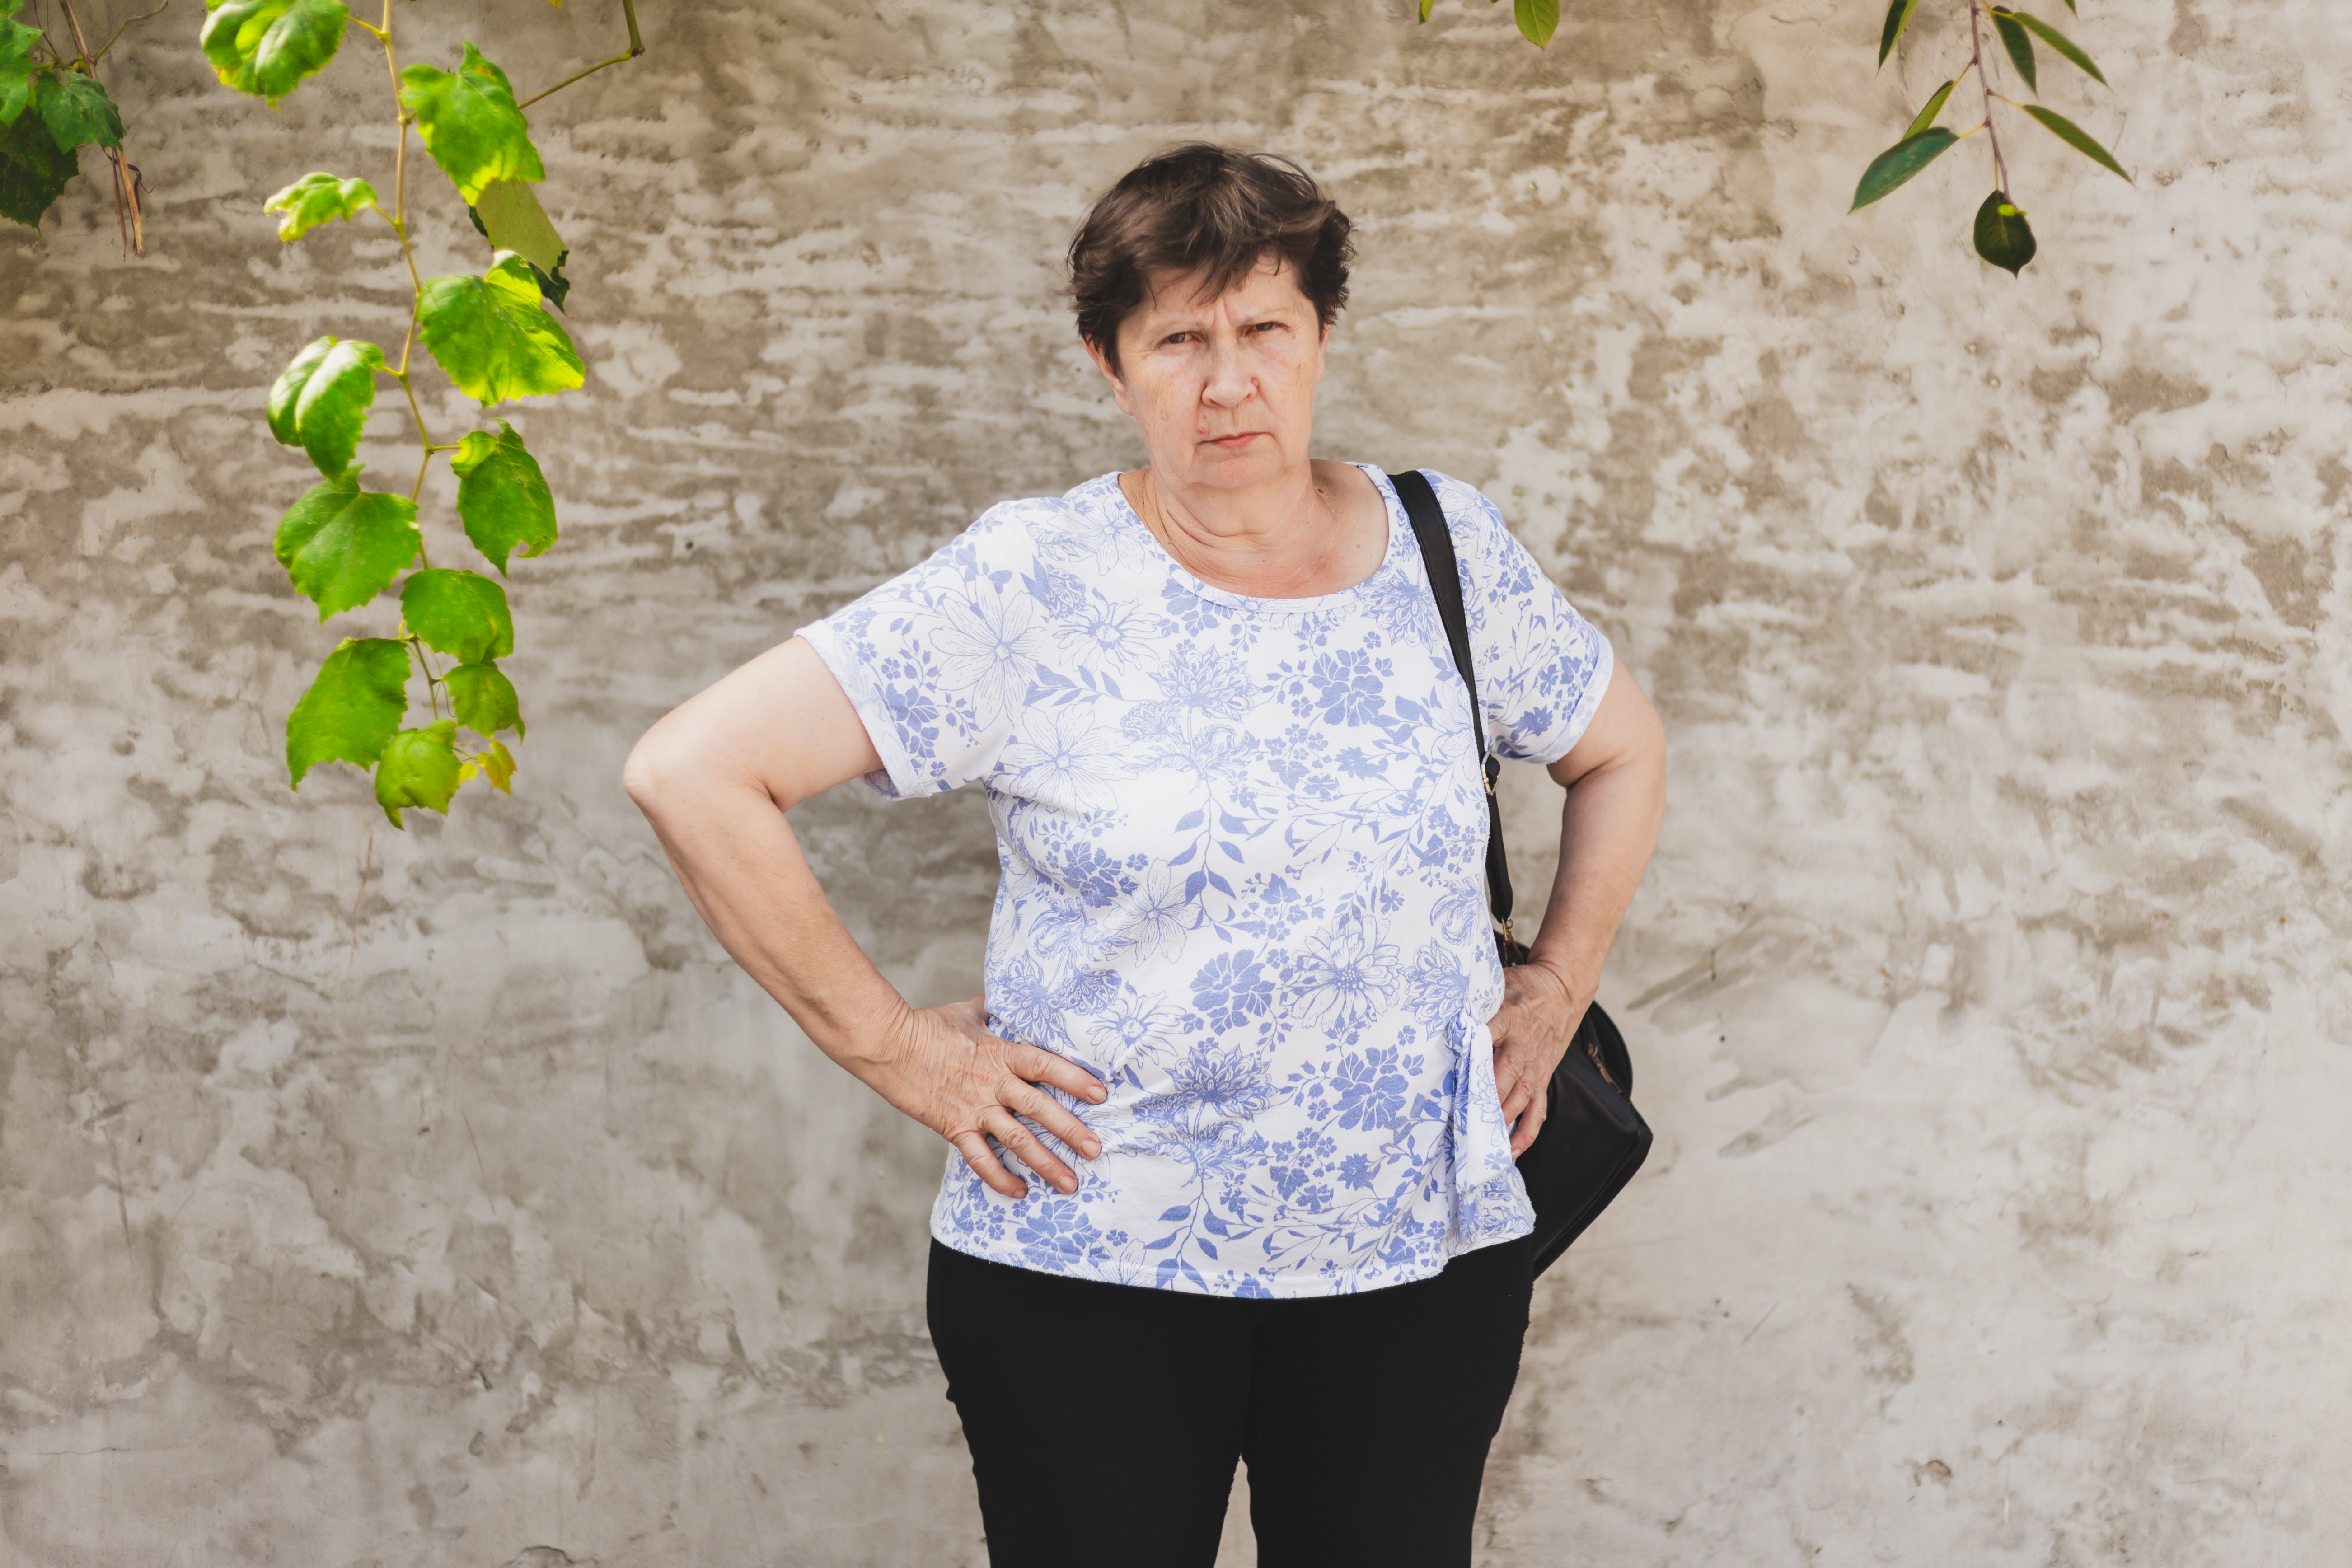 Angry senior woman | Source: Shutterstock